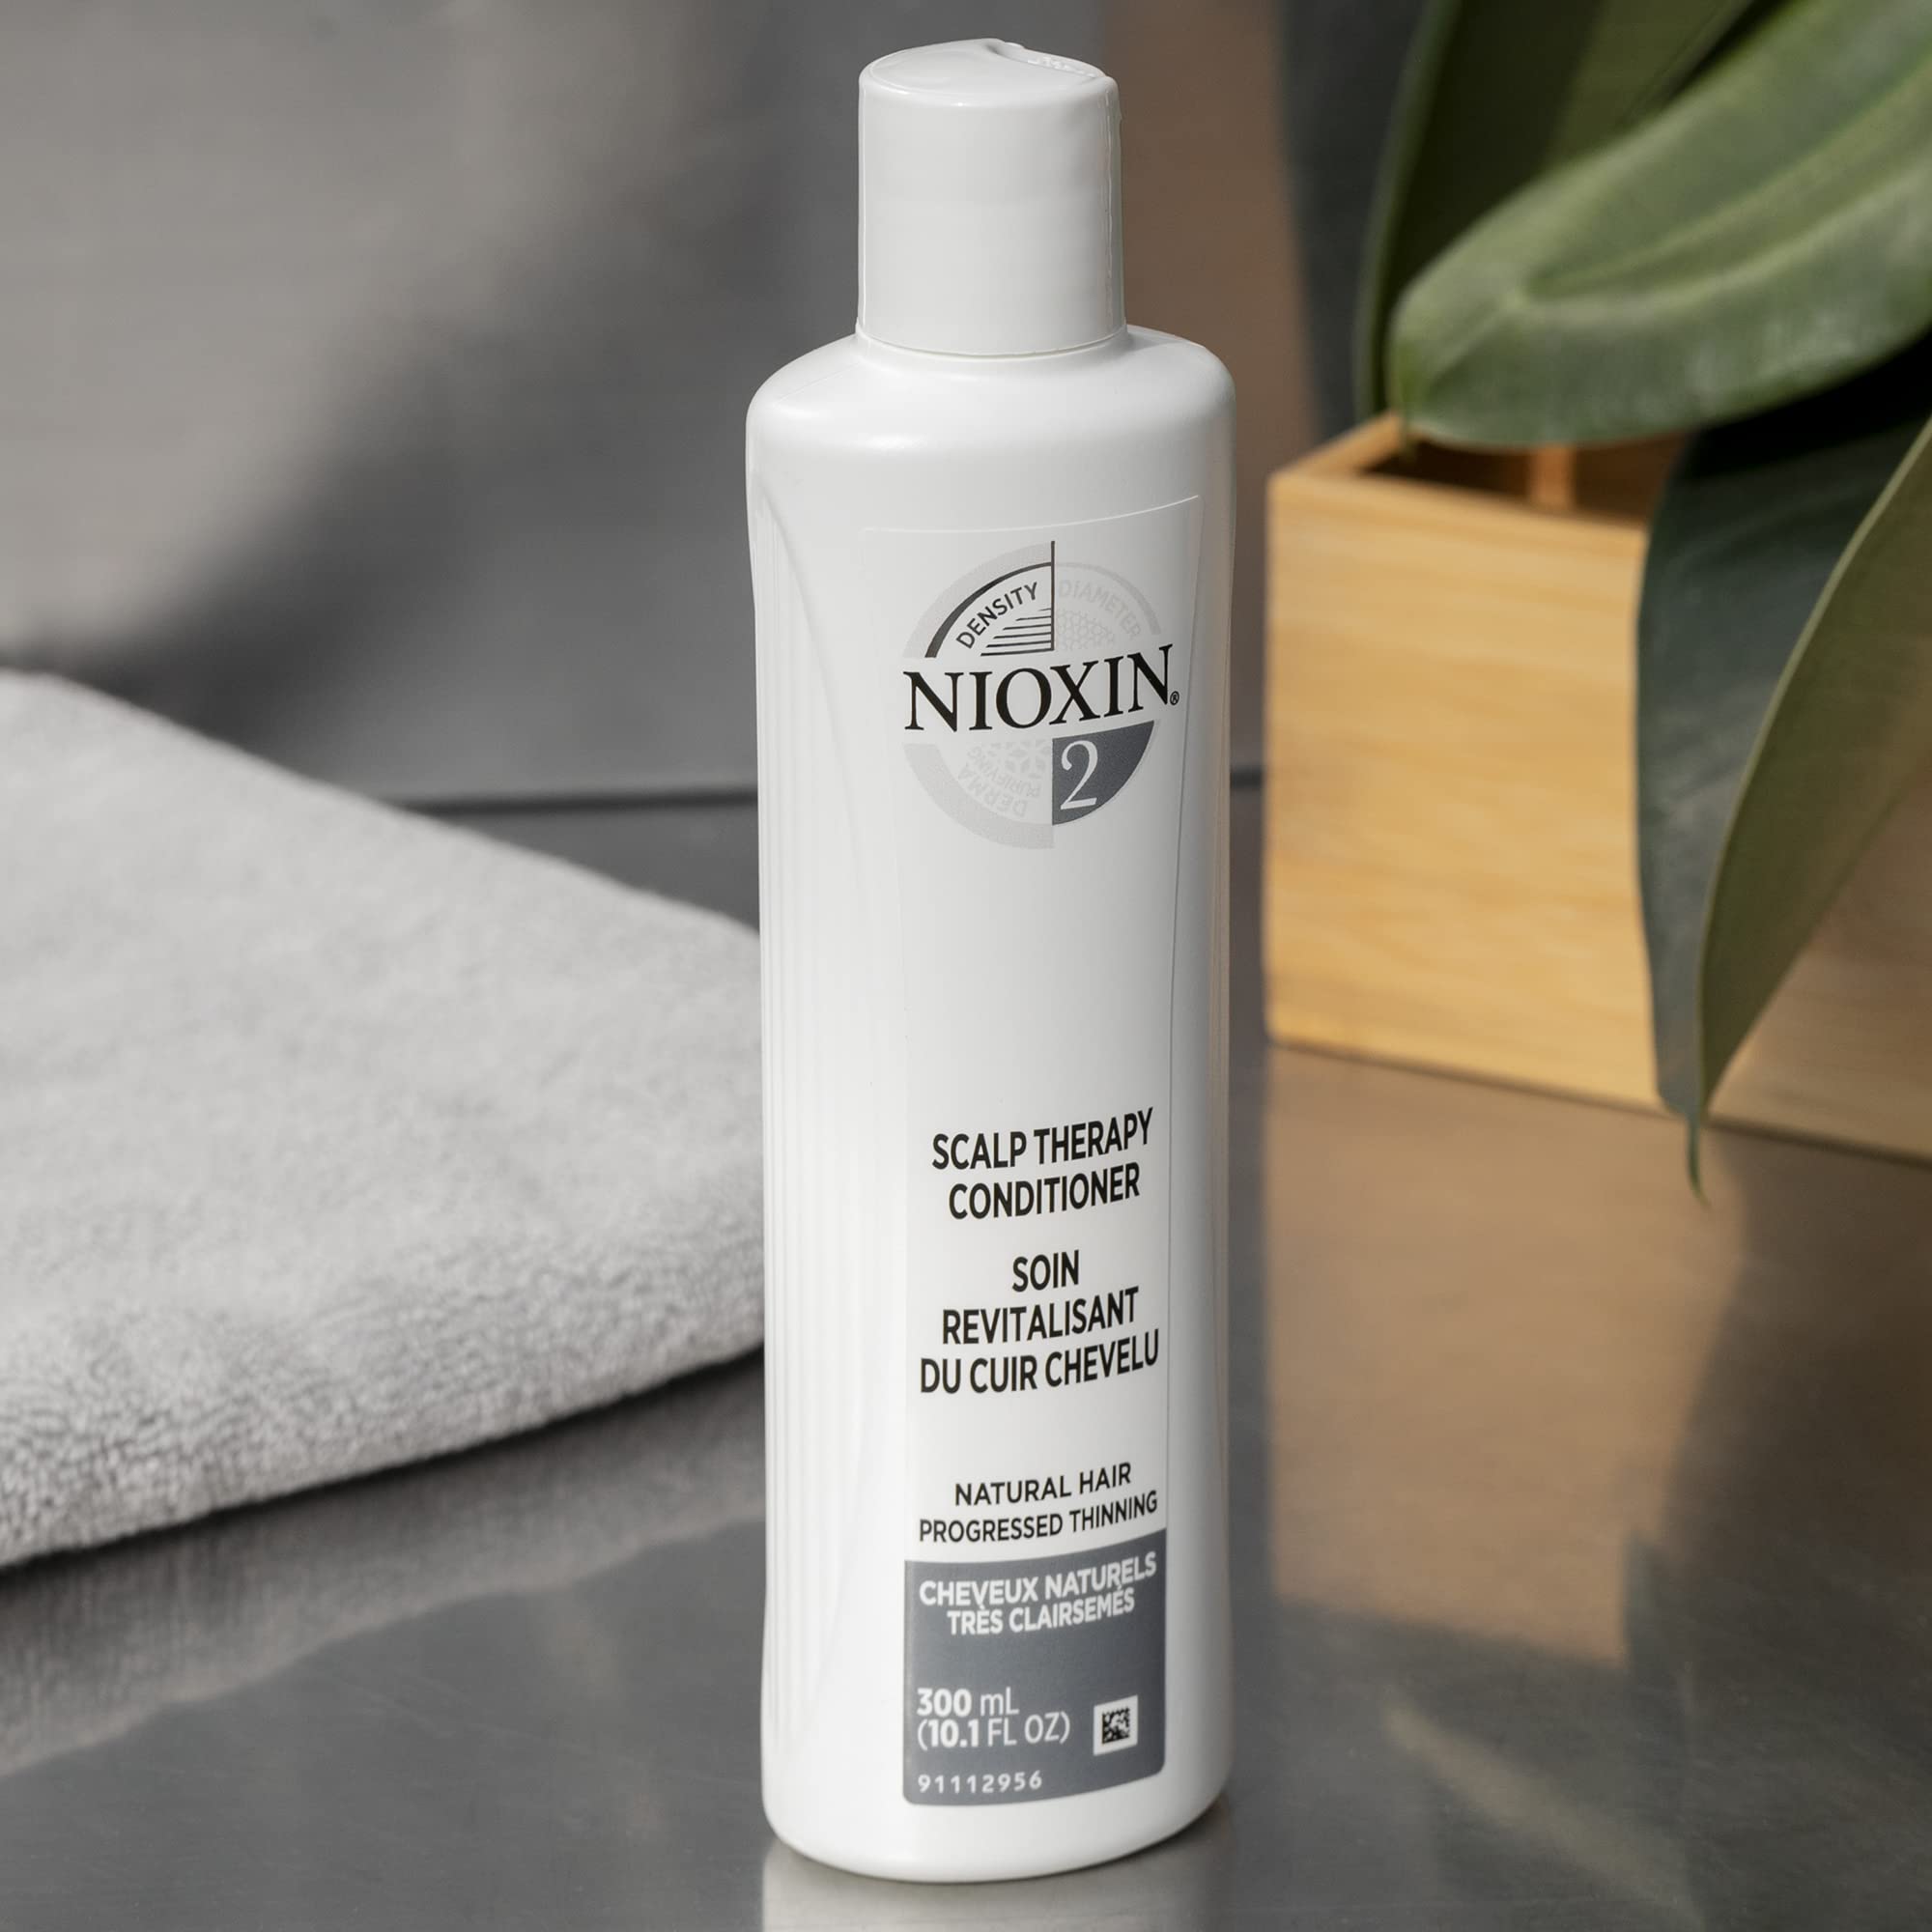 Nioxin System Kit 2, Hair Strengthening & Thickening Treatment, Treats & Hydrates Sensitive or Dry Scalp, For Natural Hair with Light Thinning, Full Size (3 Month Supply)